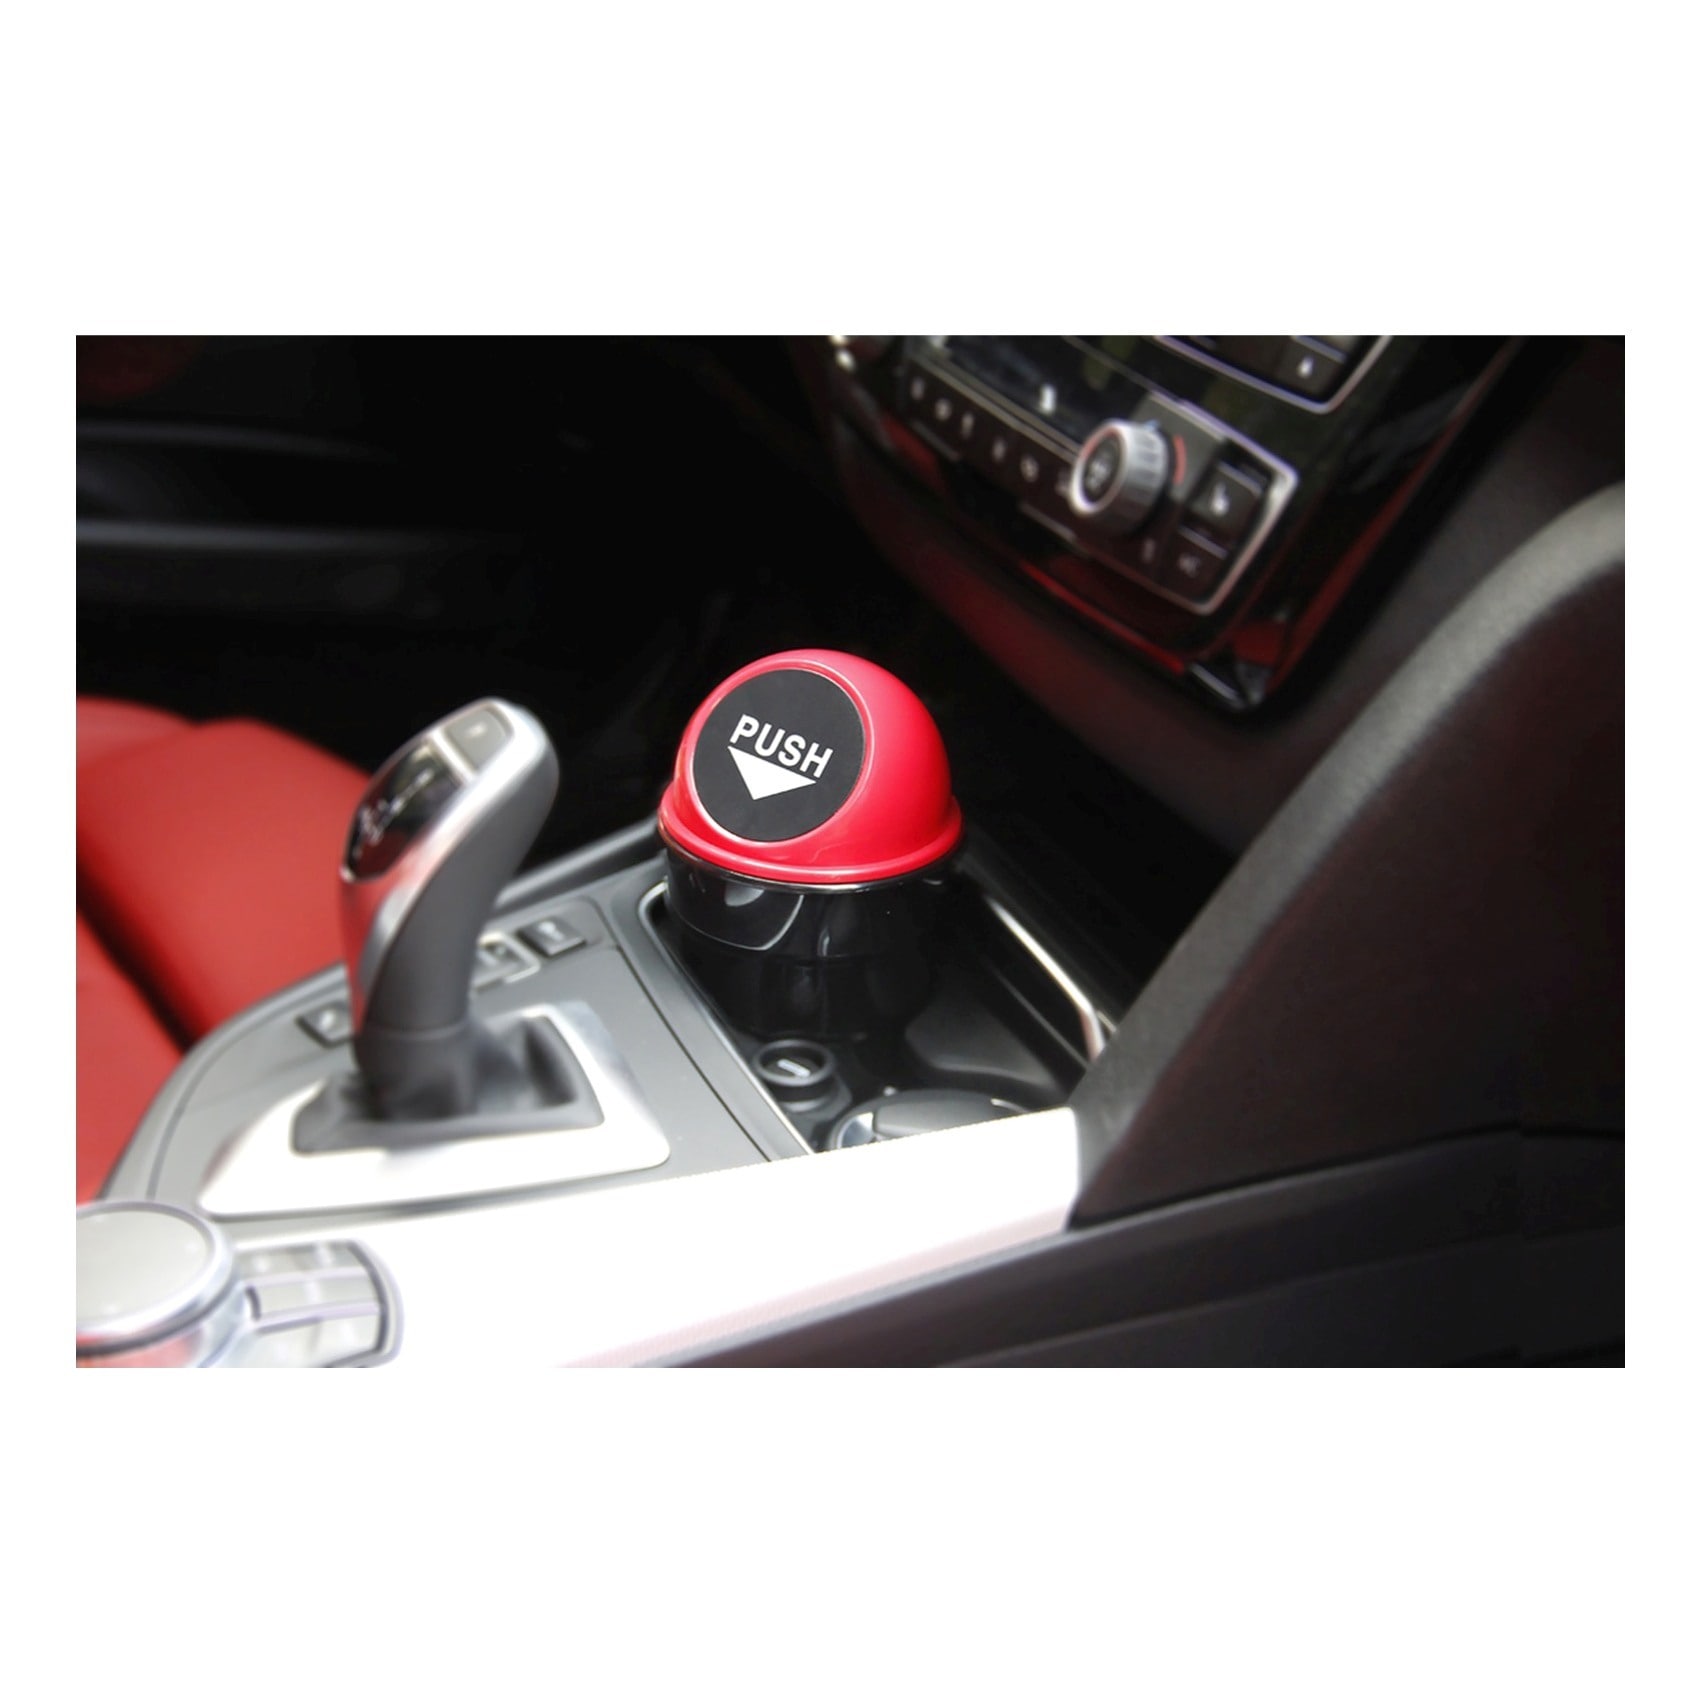 Buy Car Accessories & Cleaning Online - Shop on Carrefour UAE